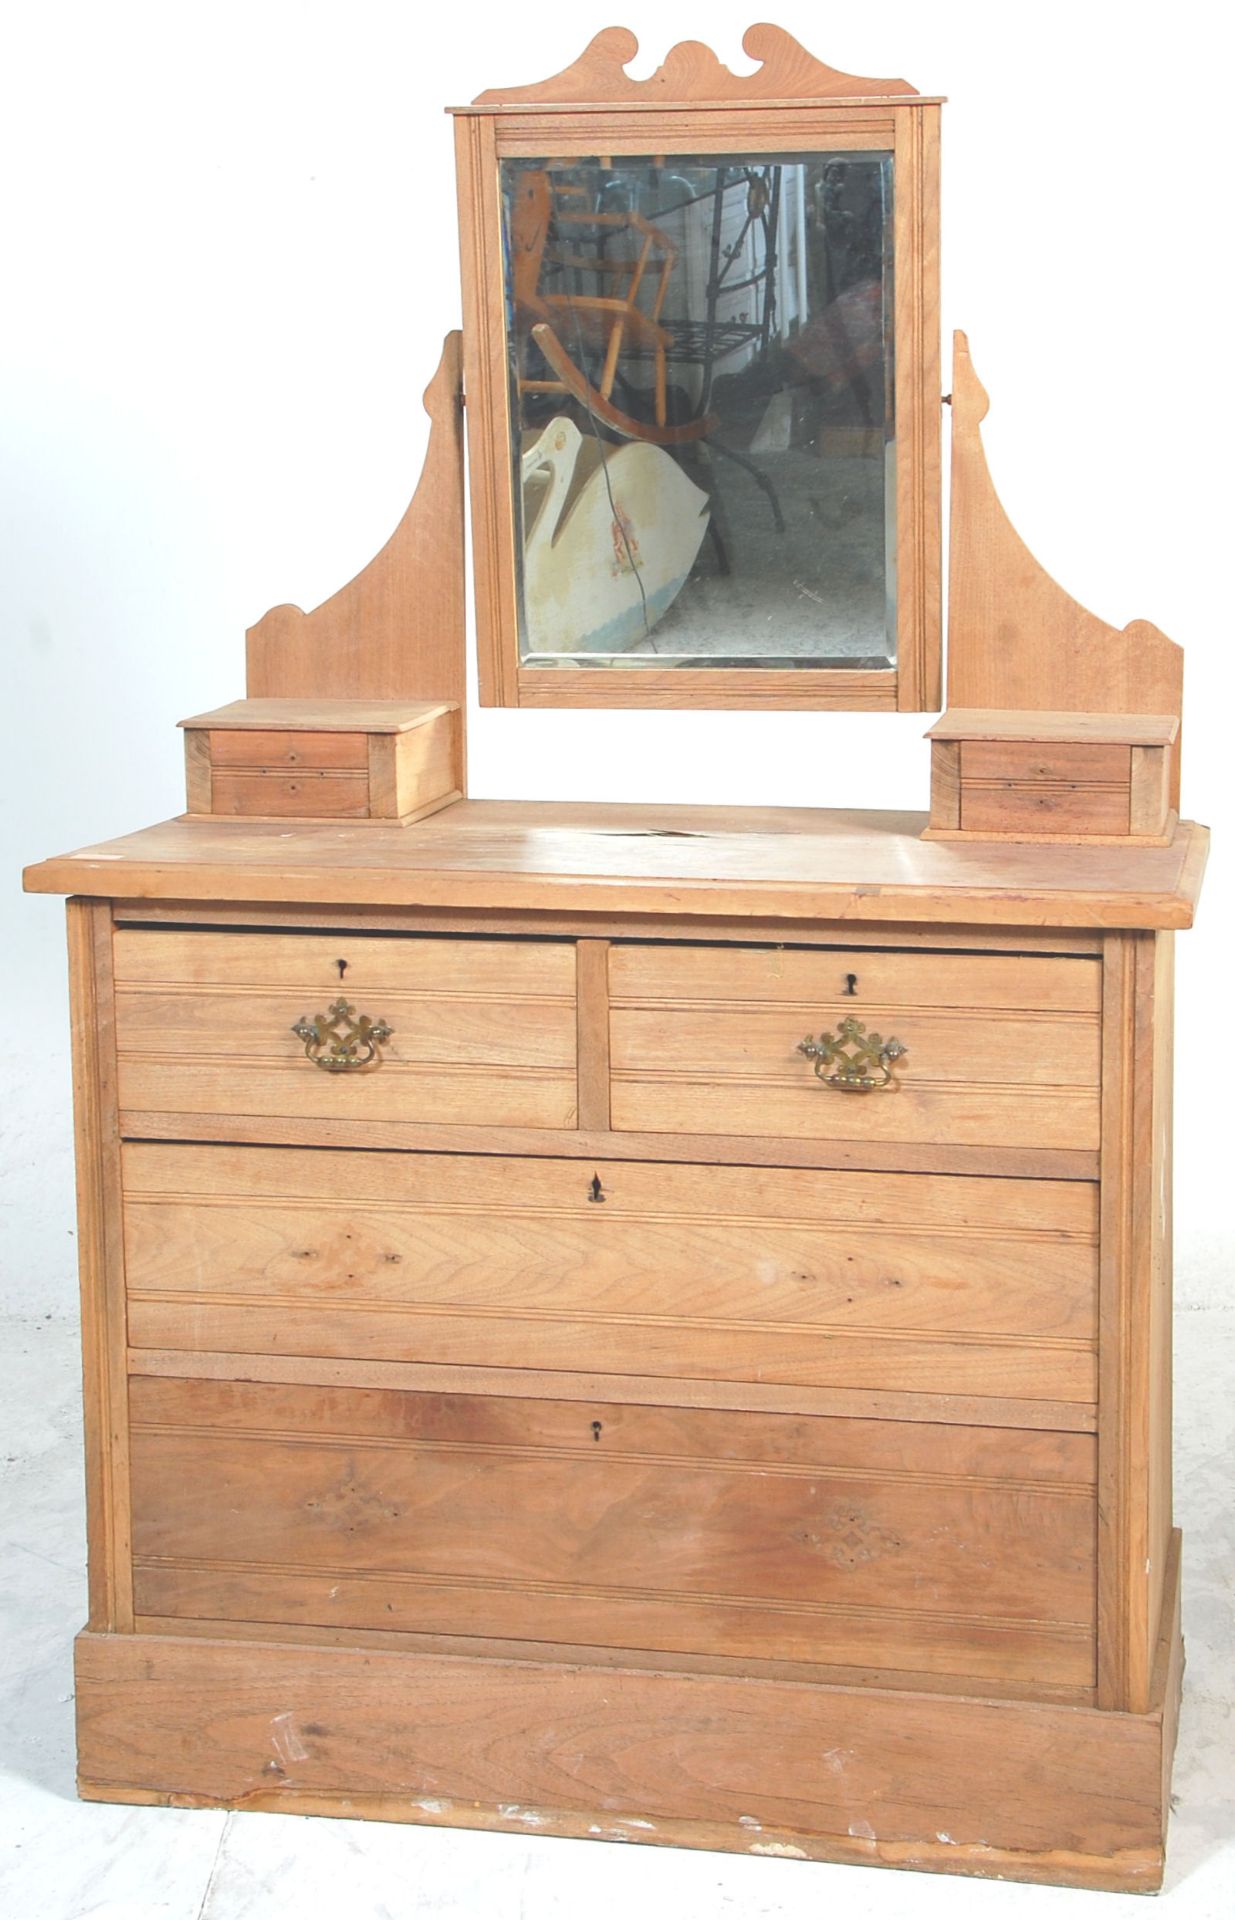 An early 20th Century Edwardian ash wood dressing table - chest of drawers having a central swing